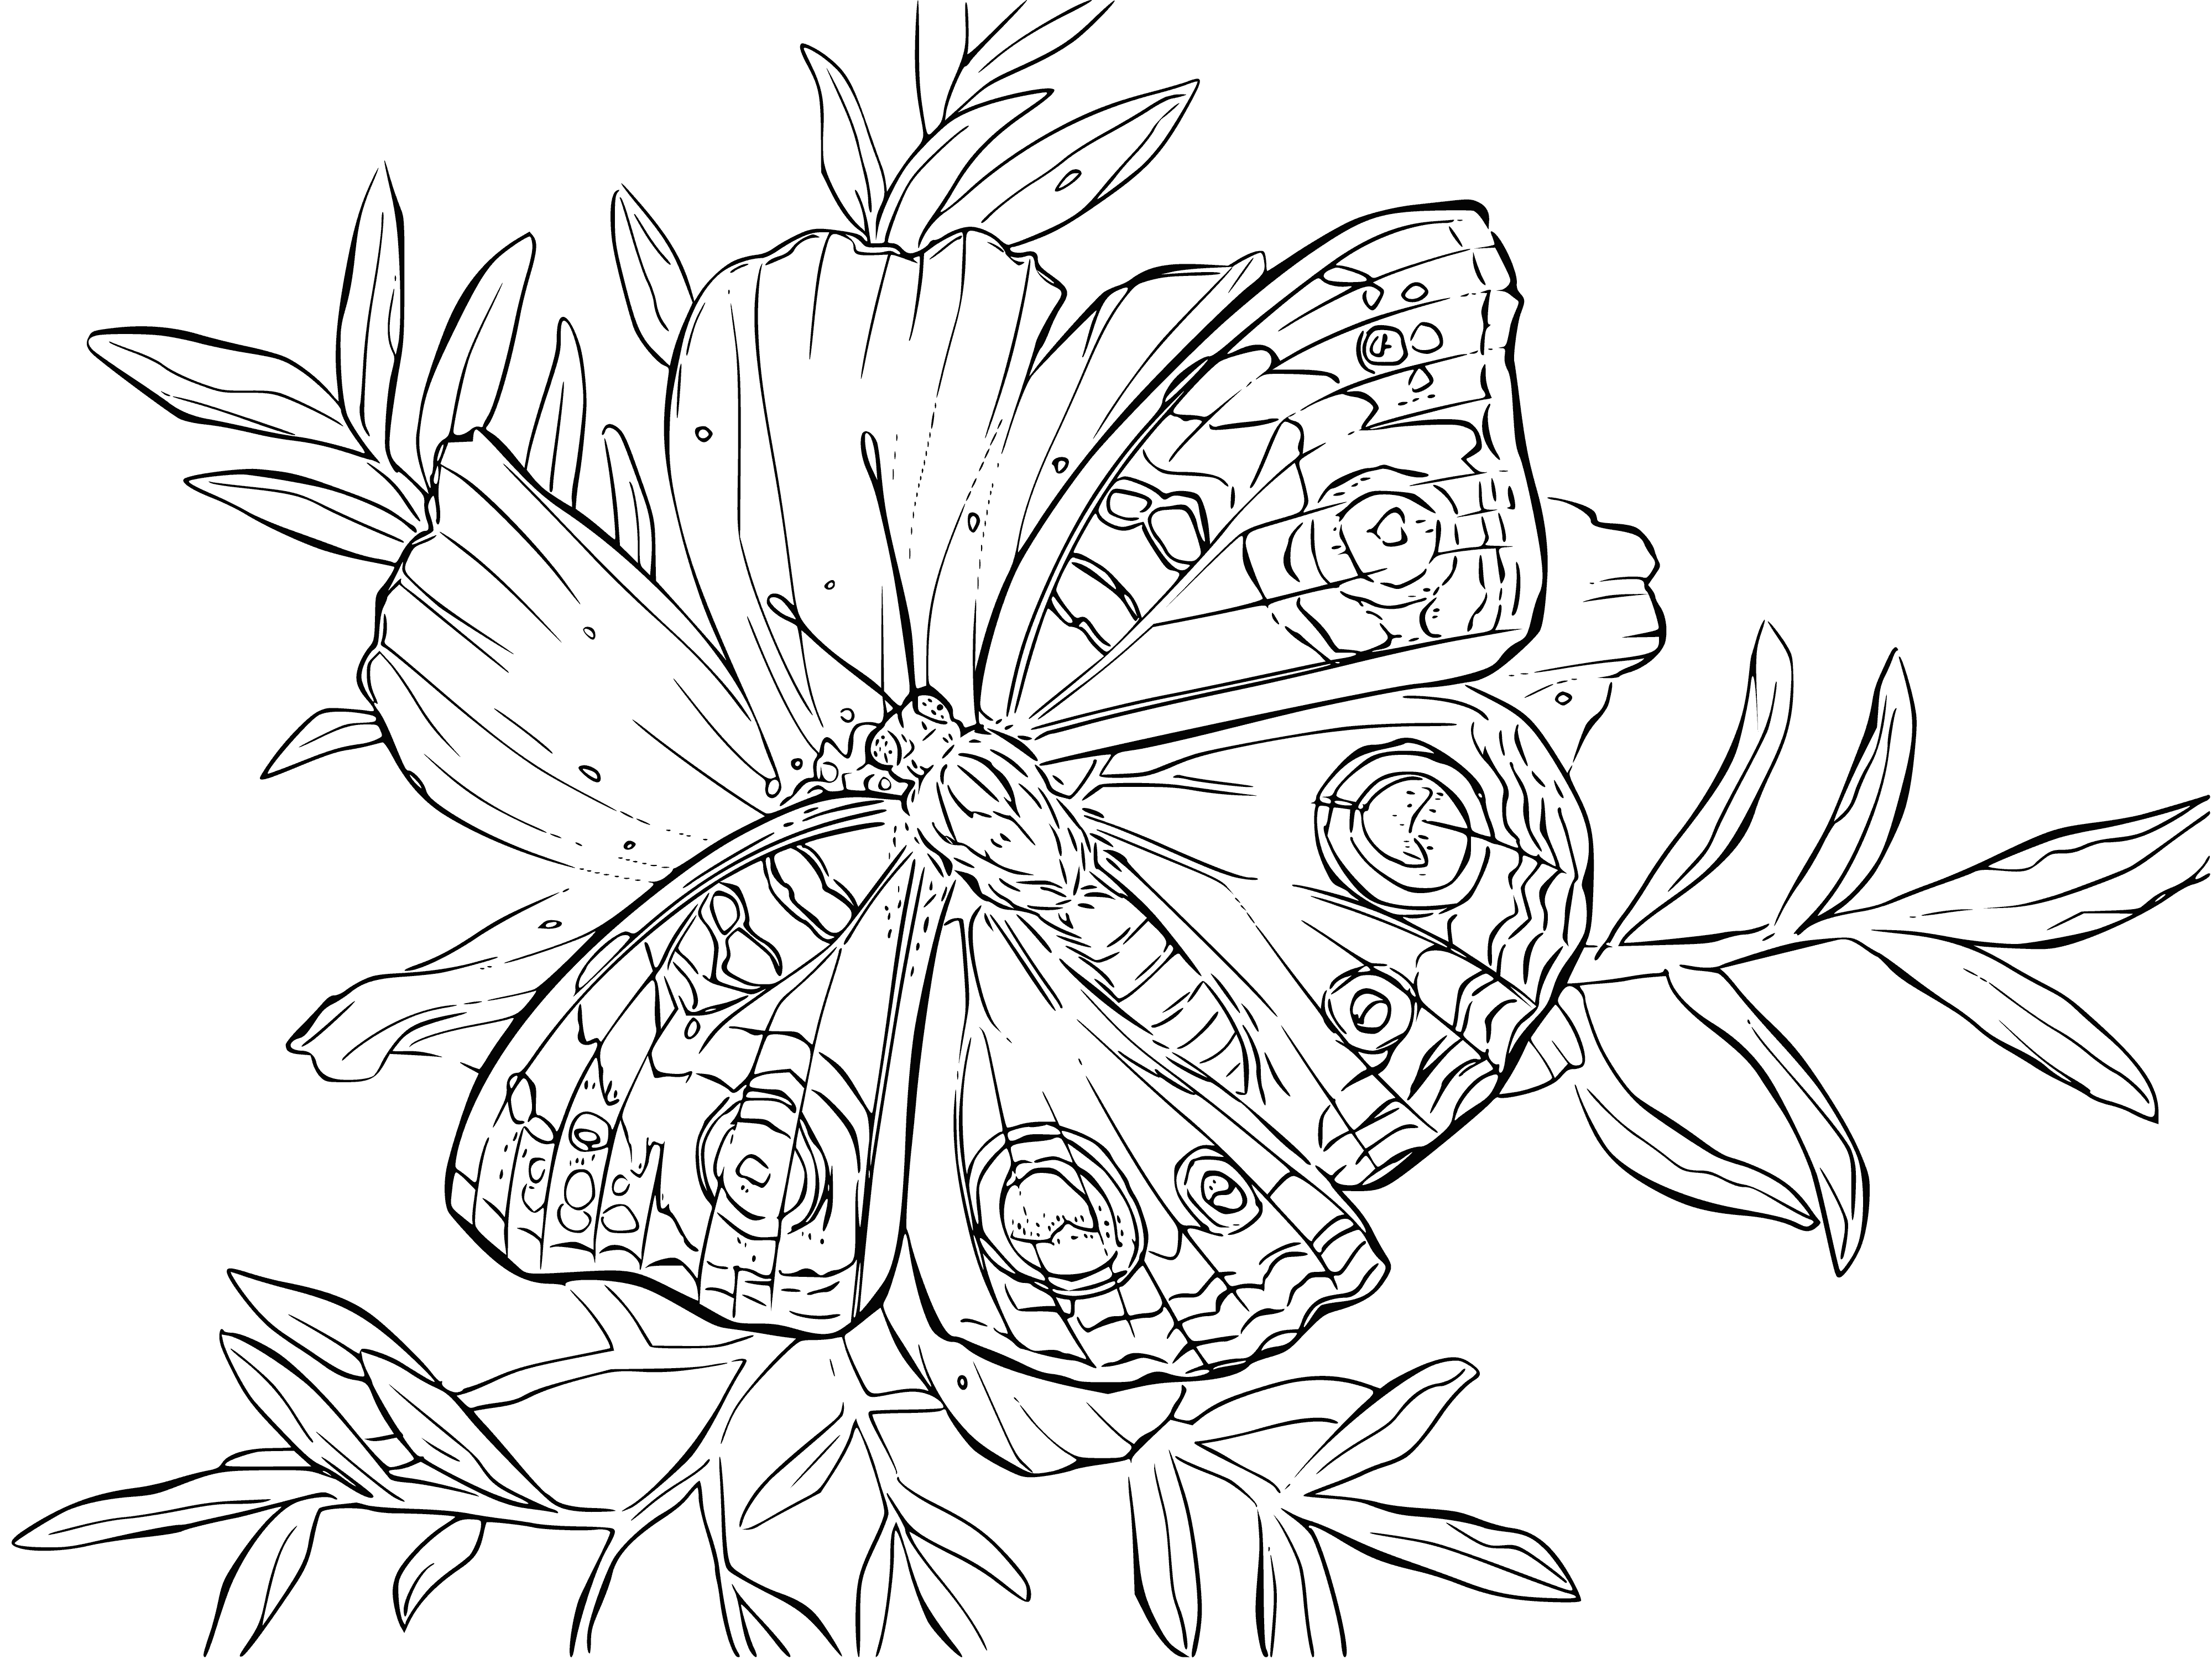 Butterfly on a flower coloring page